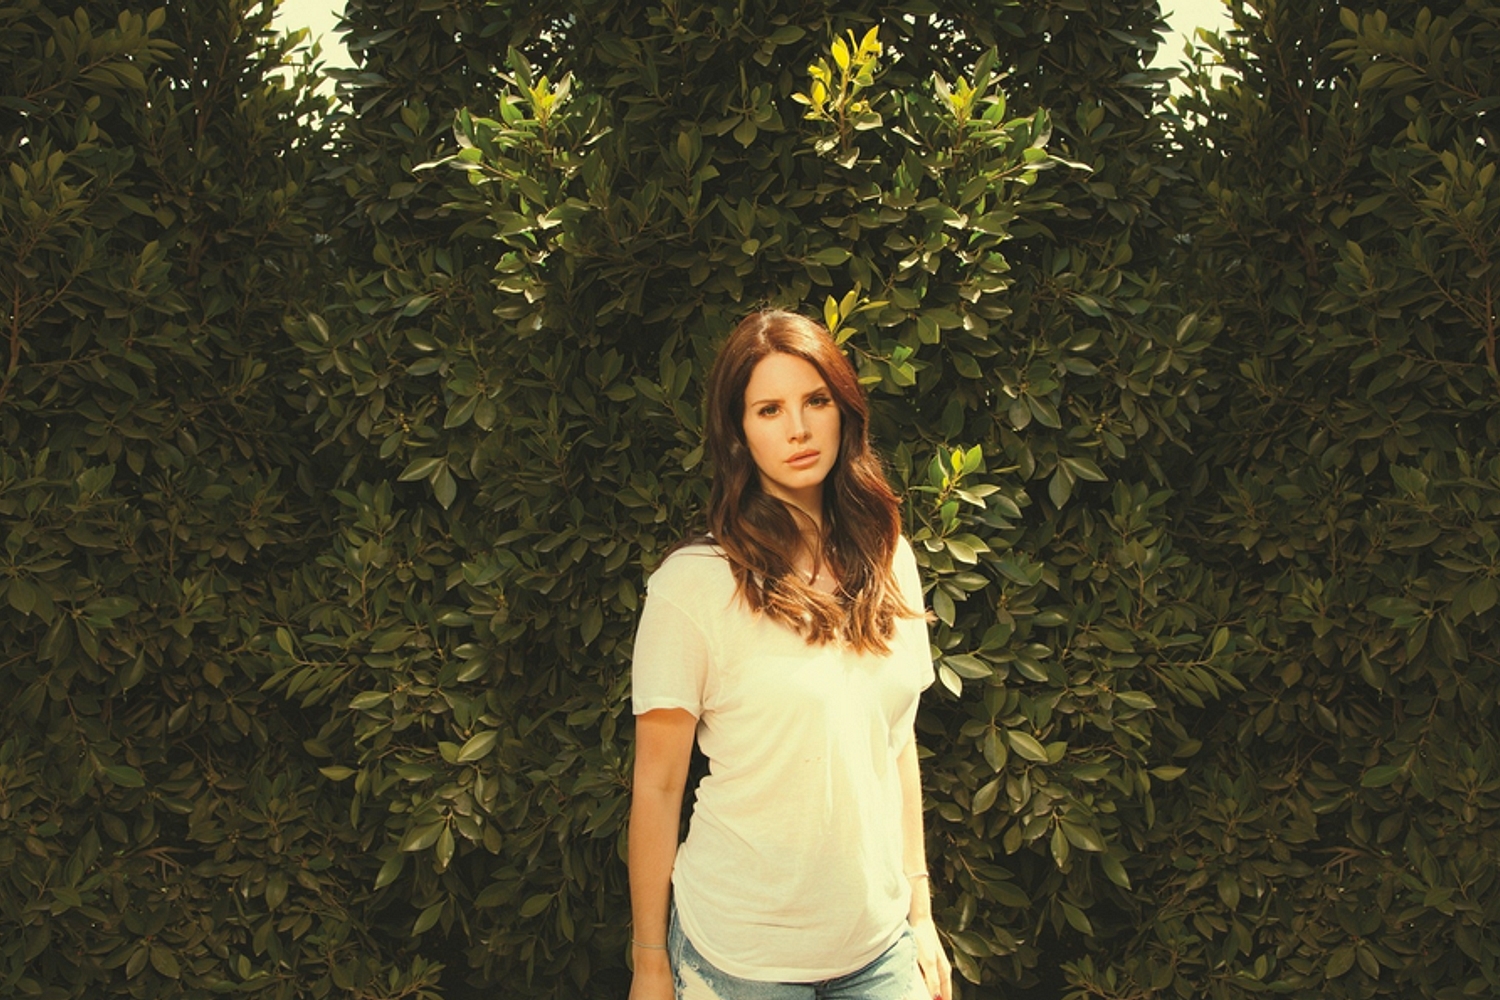 Lana Del Rey covers Daniel Johnston’s ‘Some Things Last a Long Time’